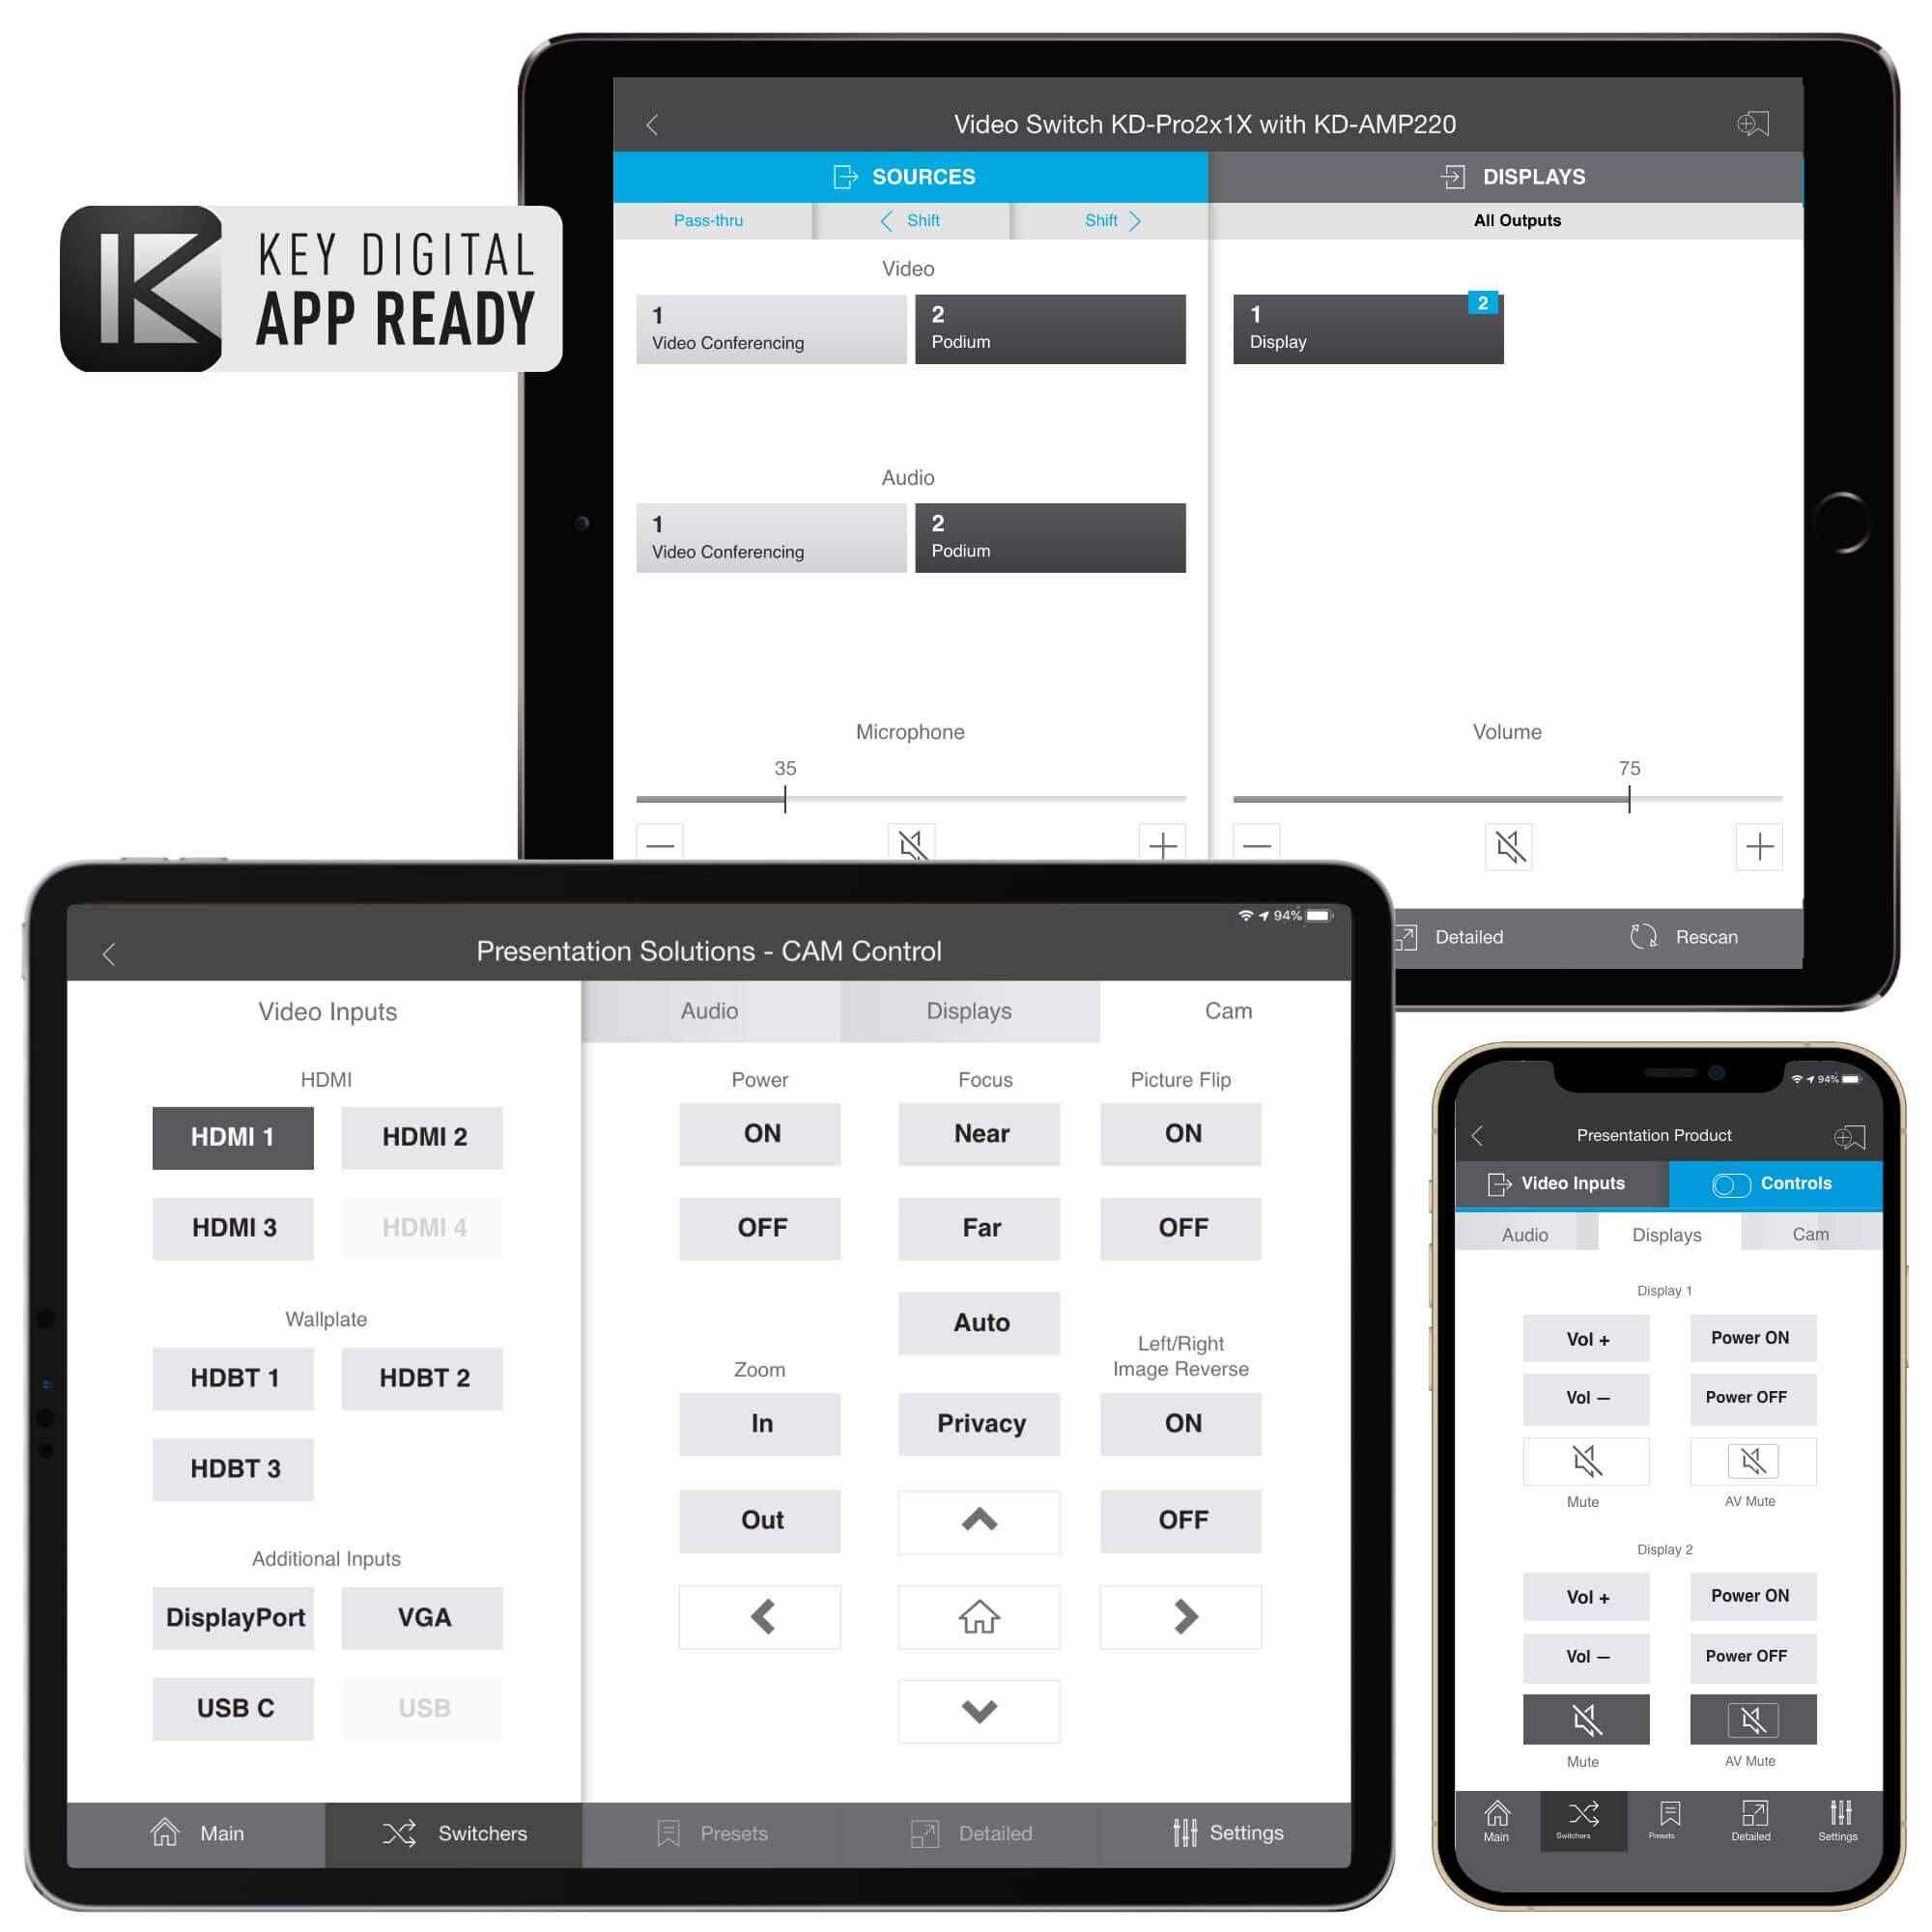 Thumbnail of Example Diagram showing presentation switchers UI of KD App